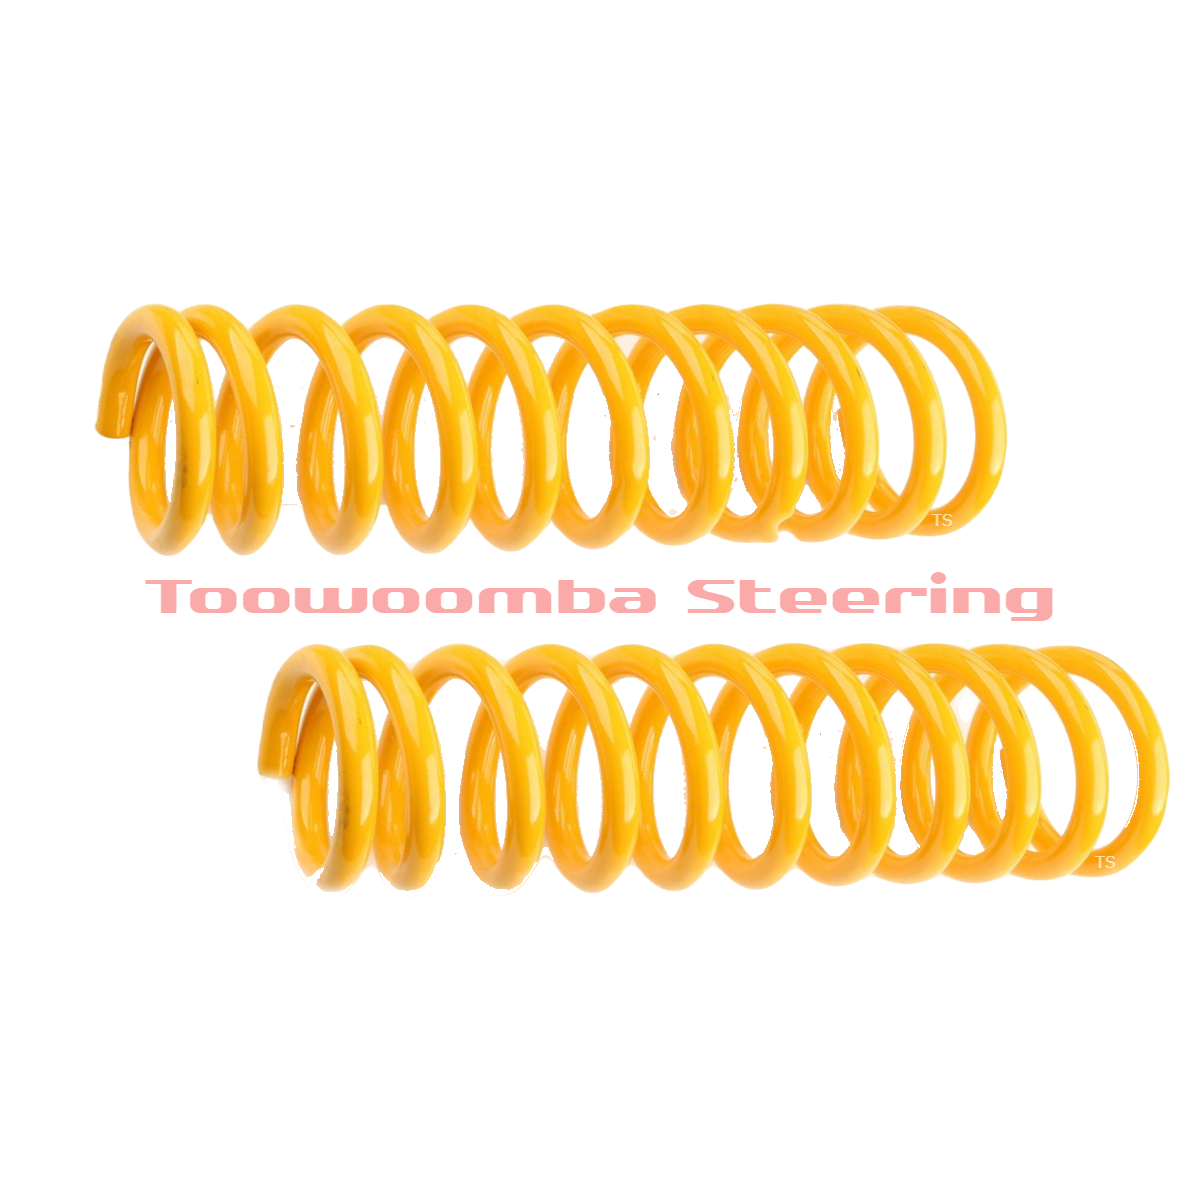 Rear Standard Height King Coil Springs - Ideal for - Holden Commodore VL; VN; VP 6CYL & 8CYL SEDAN LIVE AXLE 86-93, Commodore VR 6CYL SEDAN LIVE AXLE 93-95, Commodore VR; VS 8CYL SEDAN LIVE AXLE 93-97, Commodore VS 6CYL SEDAN LIVE AXLE 95-97 - (KHRS-20)